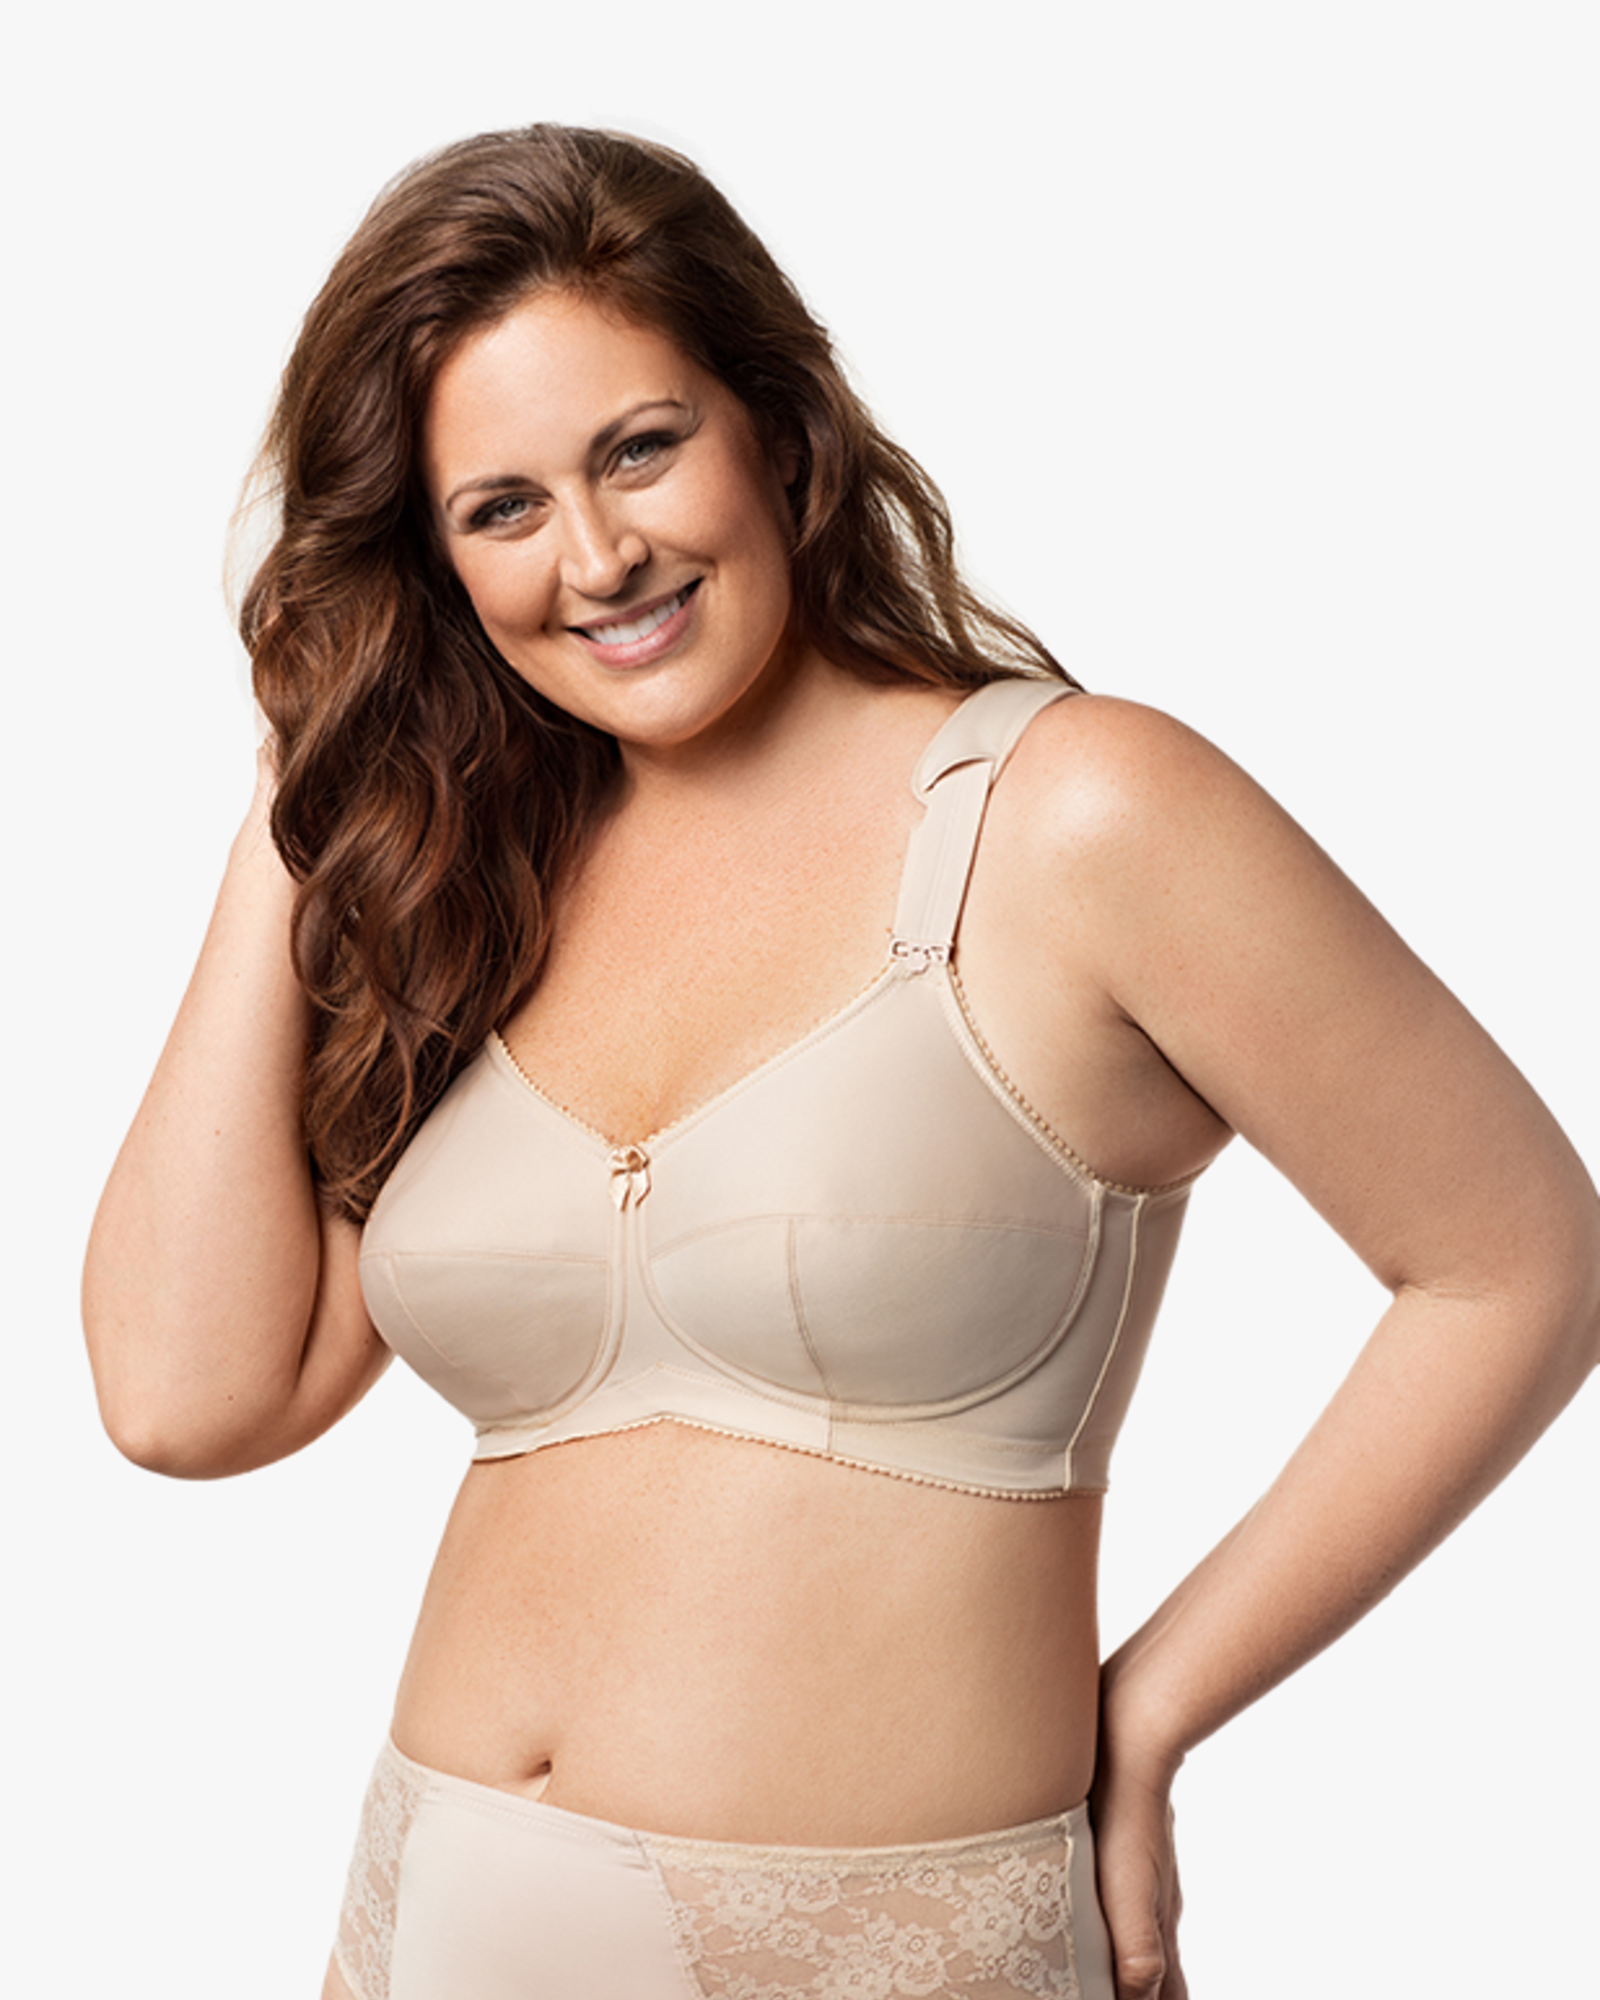 Wide Strap Bra Plus Size Full Coverage Underwire Support Panels 34 36 38 40  42 44 46 / C D E F G H I J ( 38C, Red) 